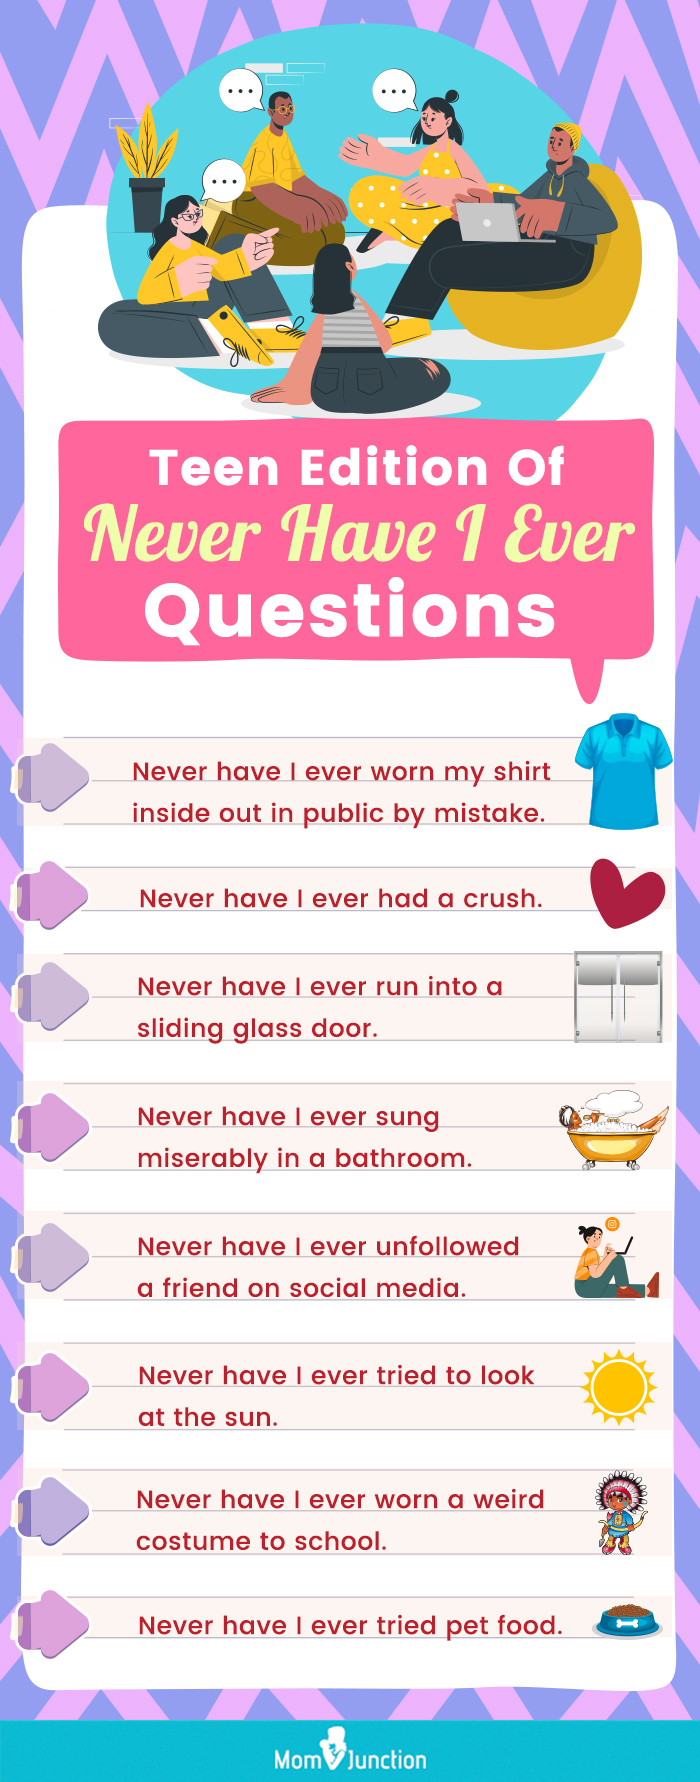 teen edition of never i have ever questions [infographic]